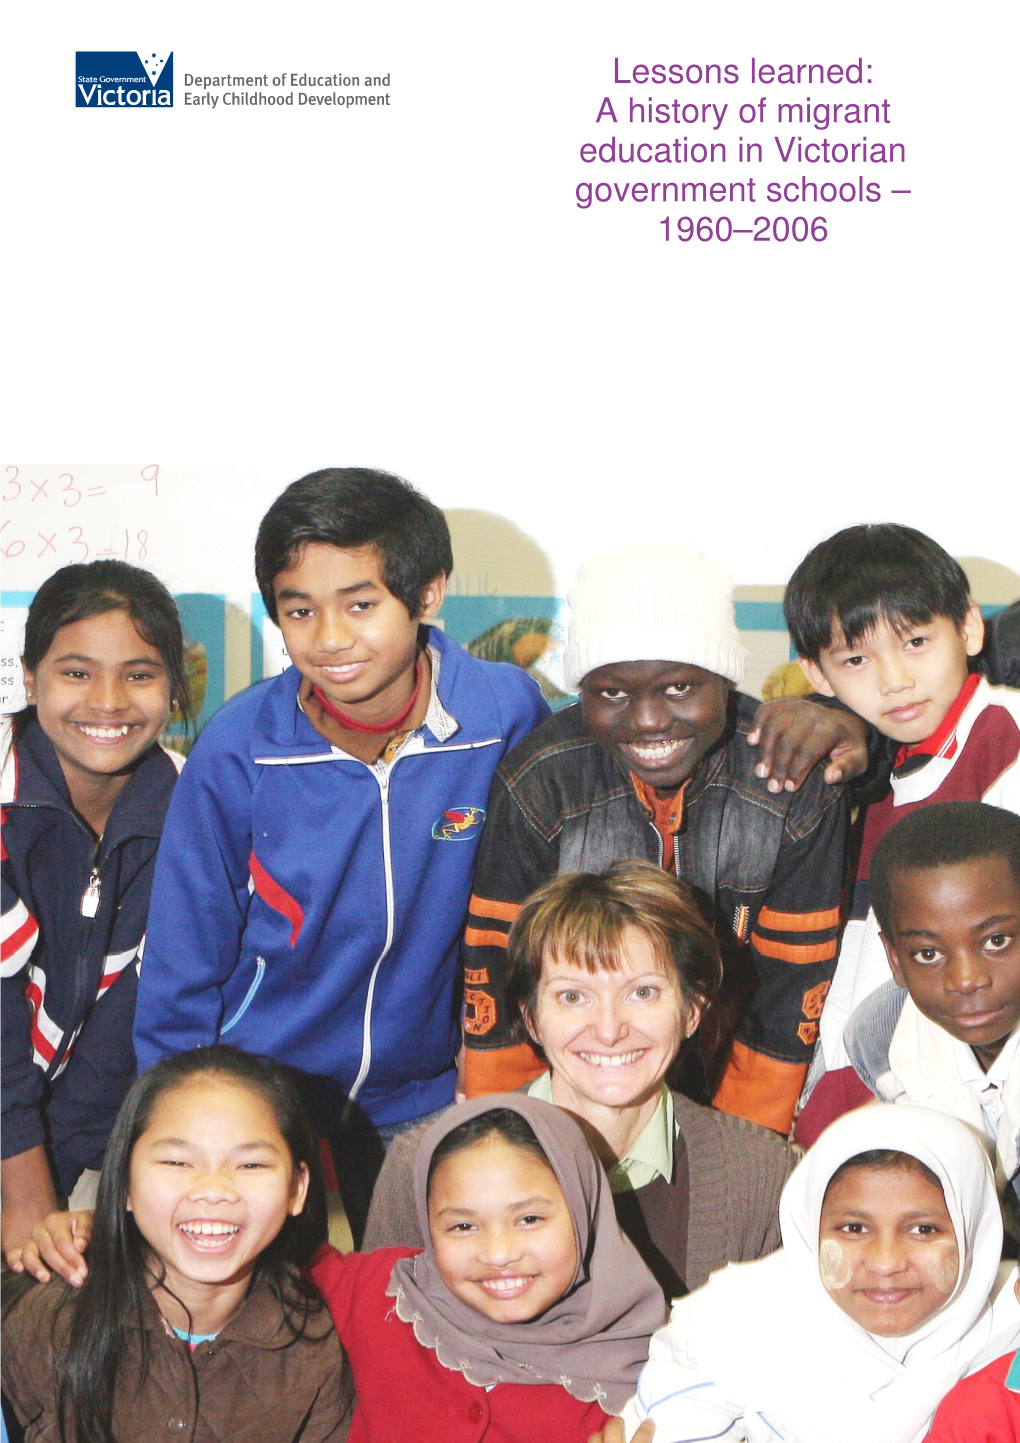 Lessons Learned: a History of Migrant Education in Victorian Government Schools –